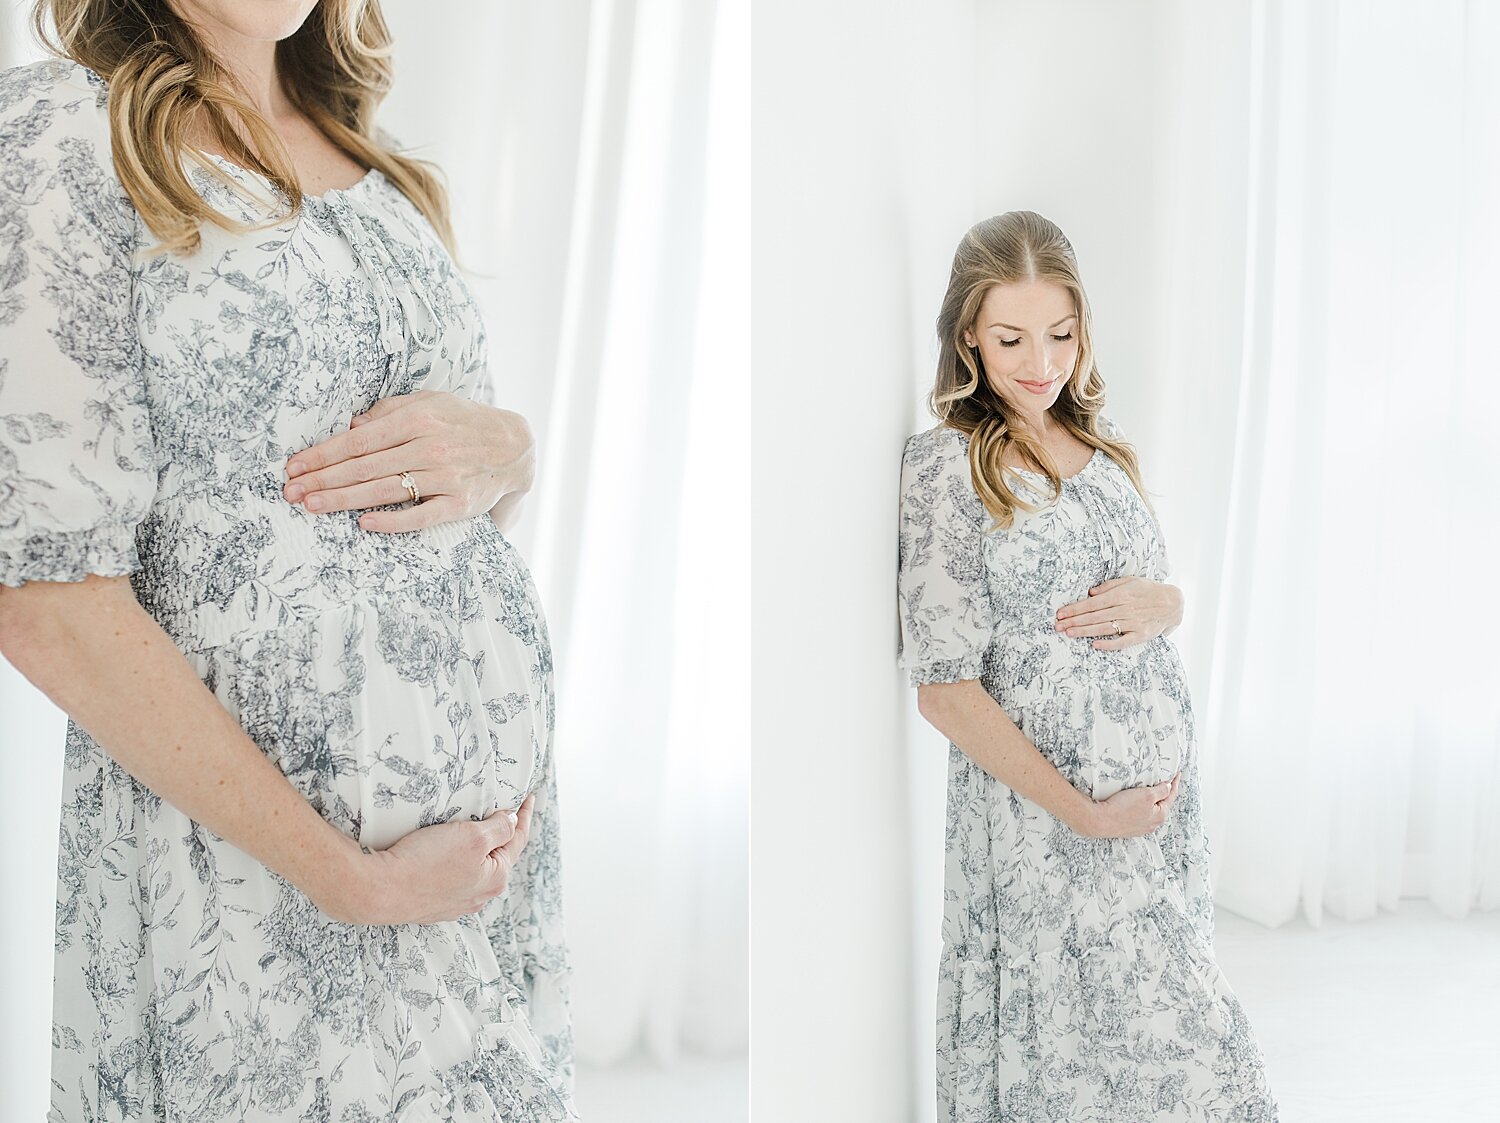 Mom wearing beautiful floral dress for maternity photos in studio in Westport, CT with Kristin Wood Photography.